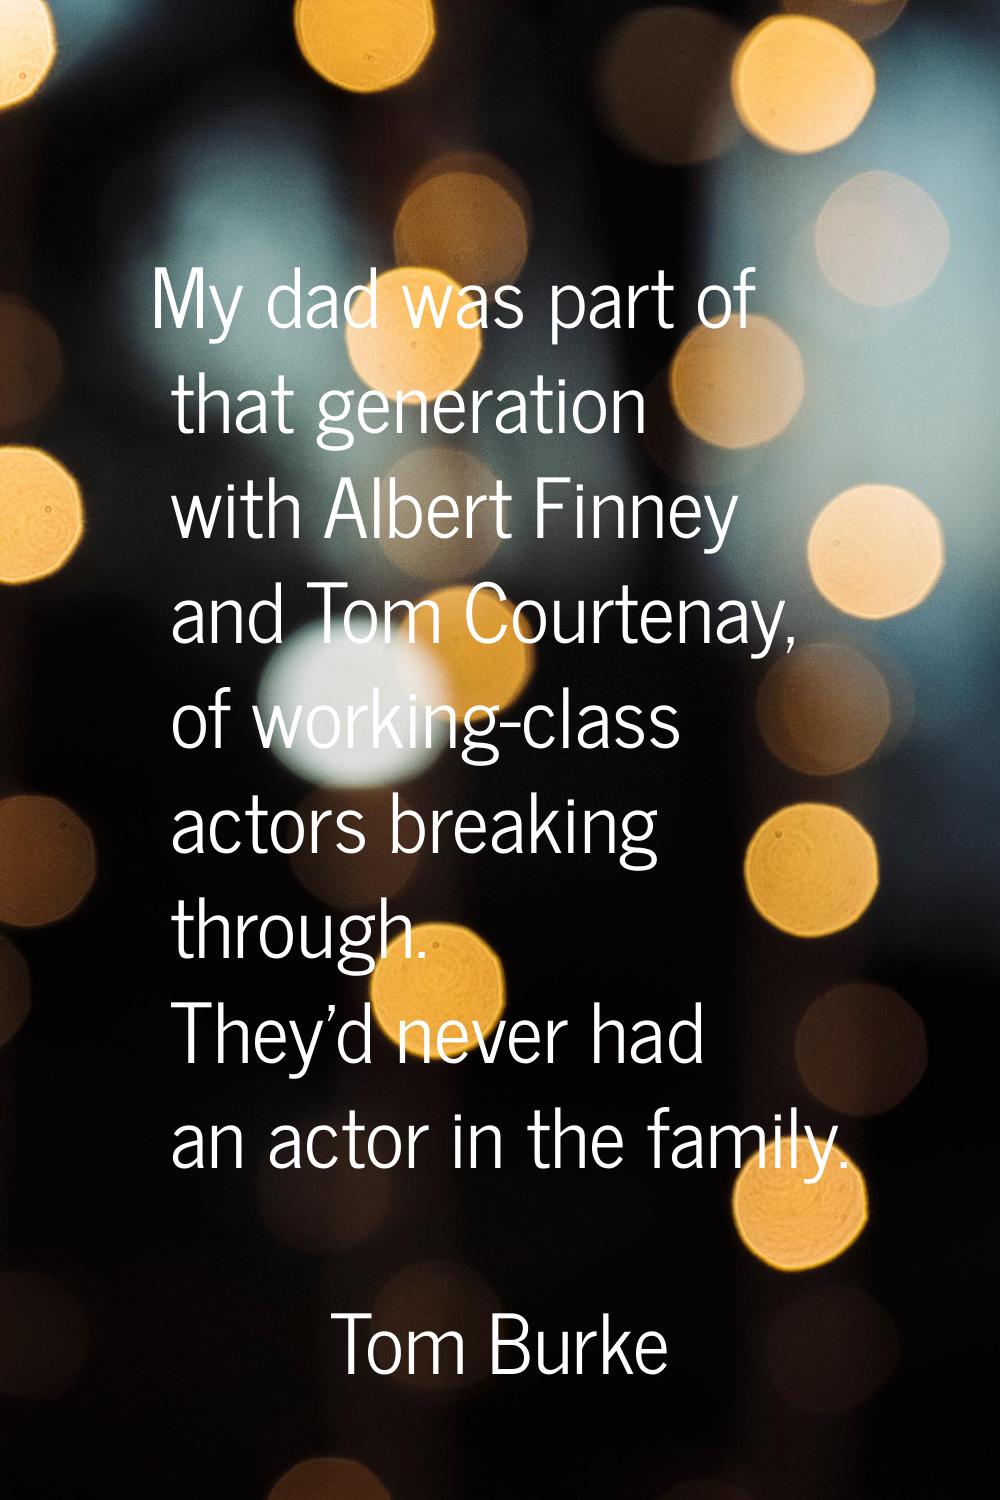 My dad was part of that generation with Albert Finney and Tom Courtenay, of working-class actors br